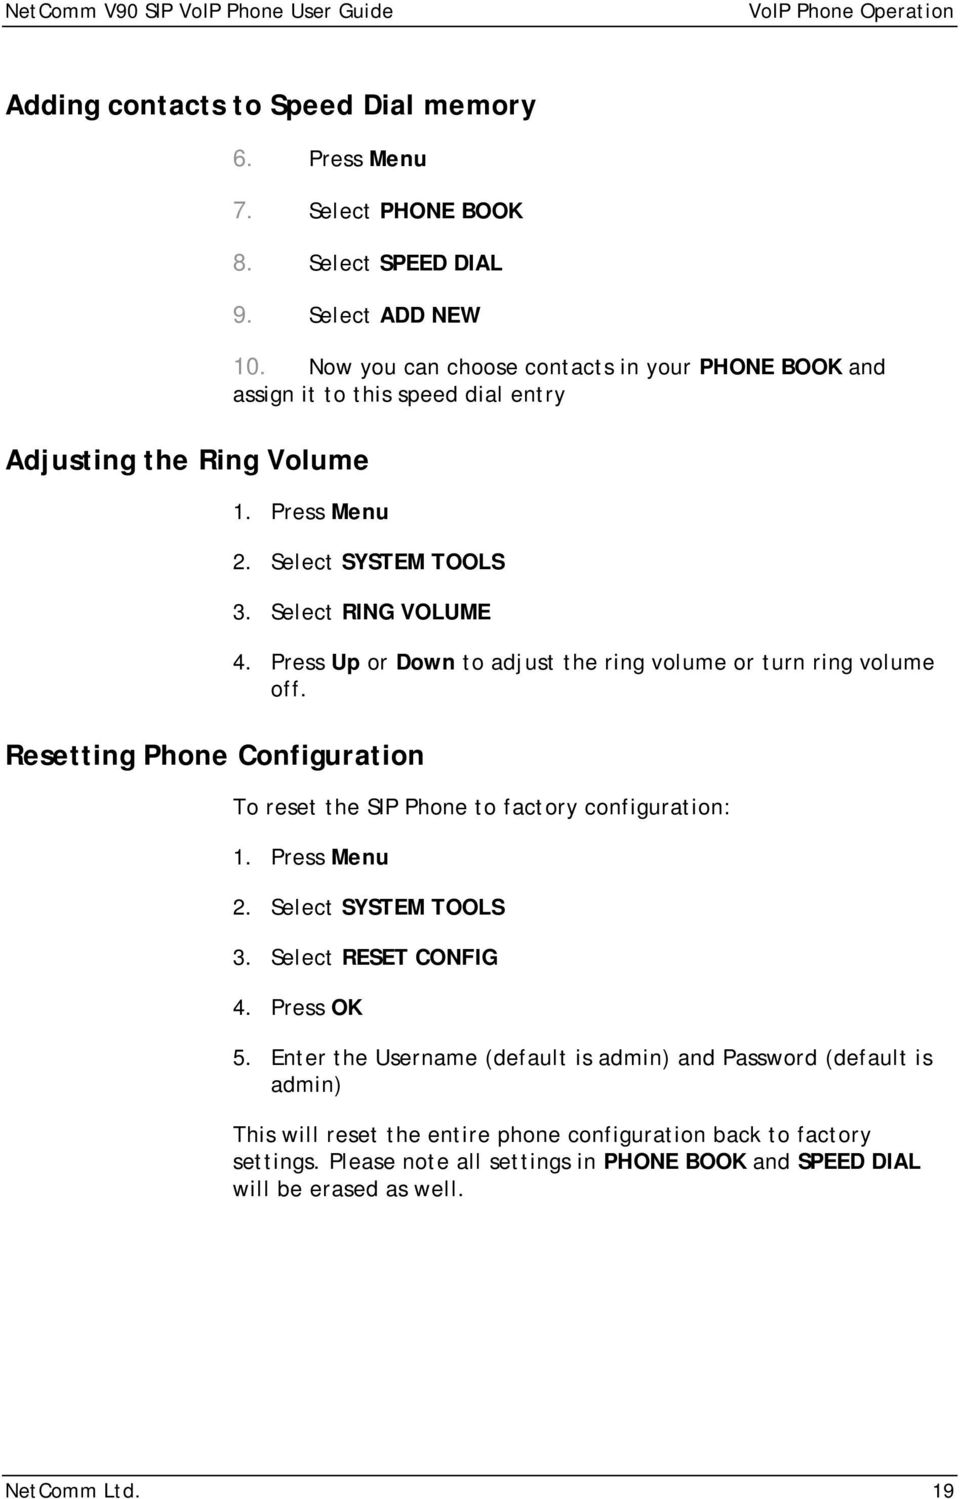 Press Up or Down to adjust the ring volume or turn ring volume off. To reset the SIP Phone to factory configuration: 1. Press Menu 2. Select SYSTEM TOOLS 3. Select RESET CONFIG 4. Press OK 5.